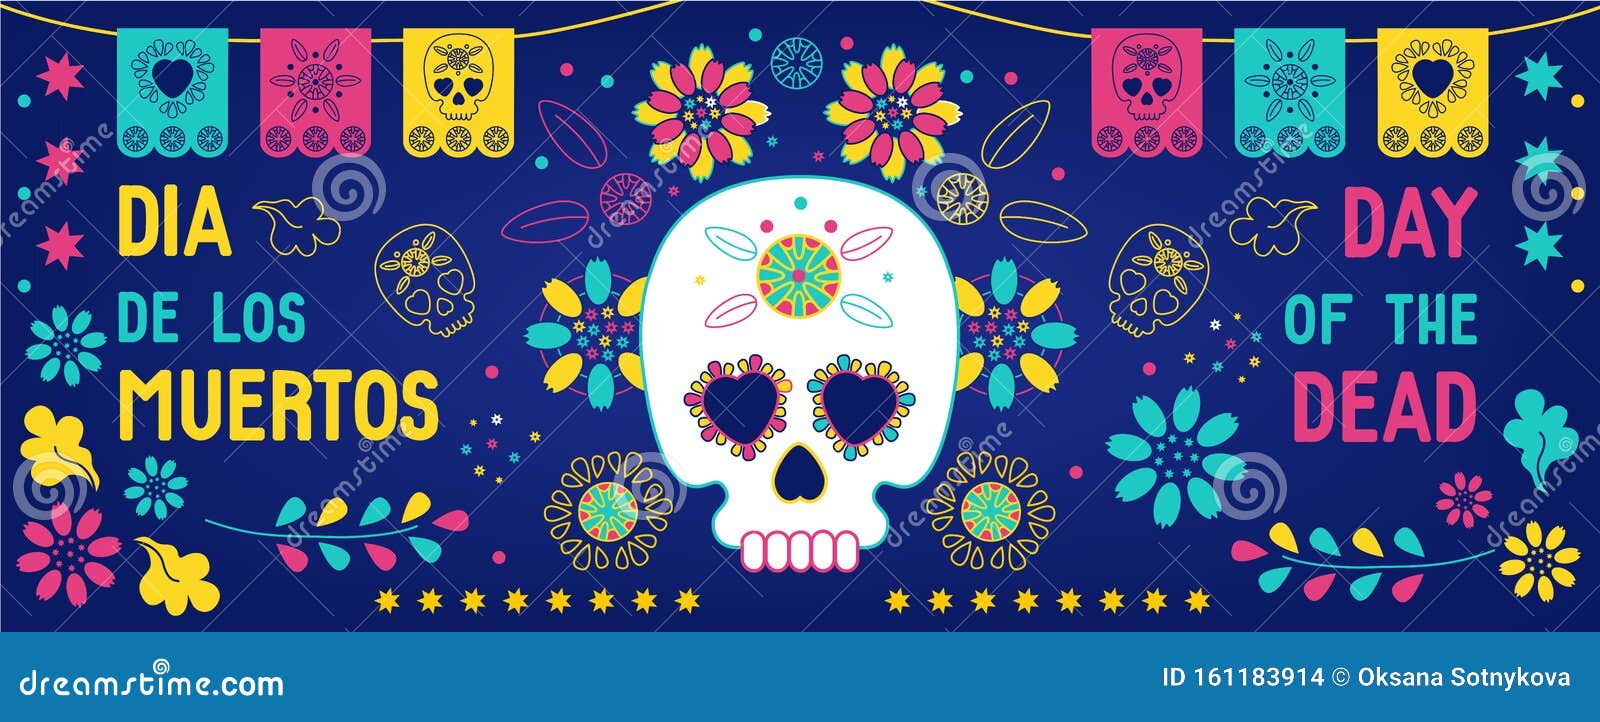 10x6.5ft Dia De Los Muertos Backdrop for Mexican Fiesta Day of The Dead Photography Background Cartoon Grinning Skull Flowers Illustration Fiesta Carnival Makeup Party Banner